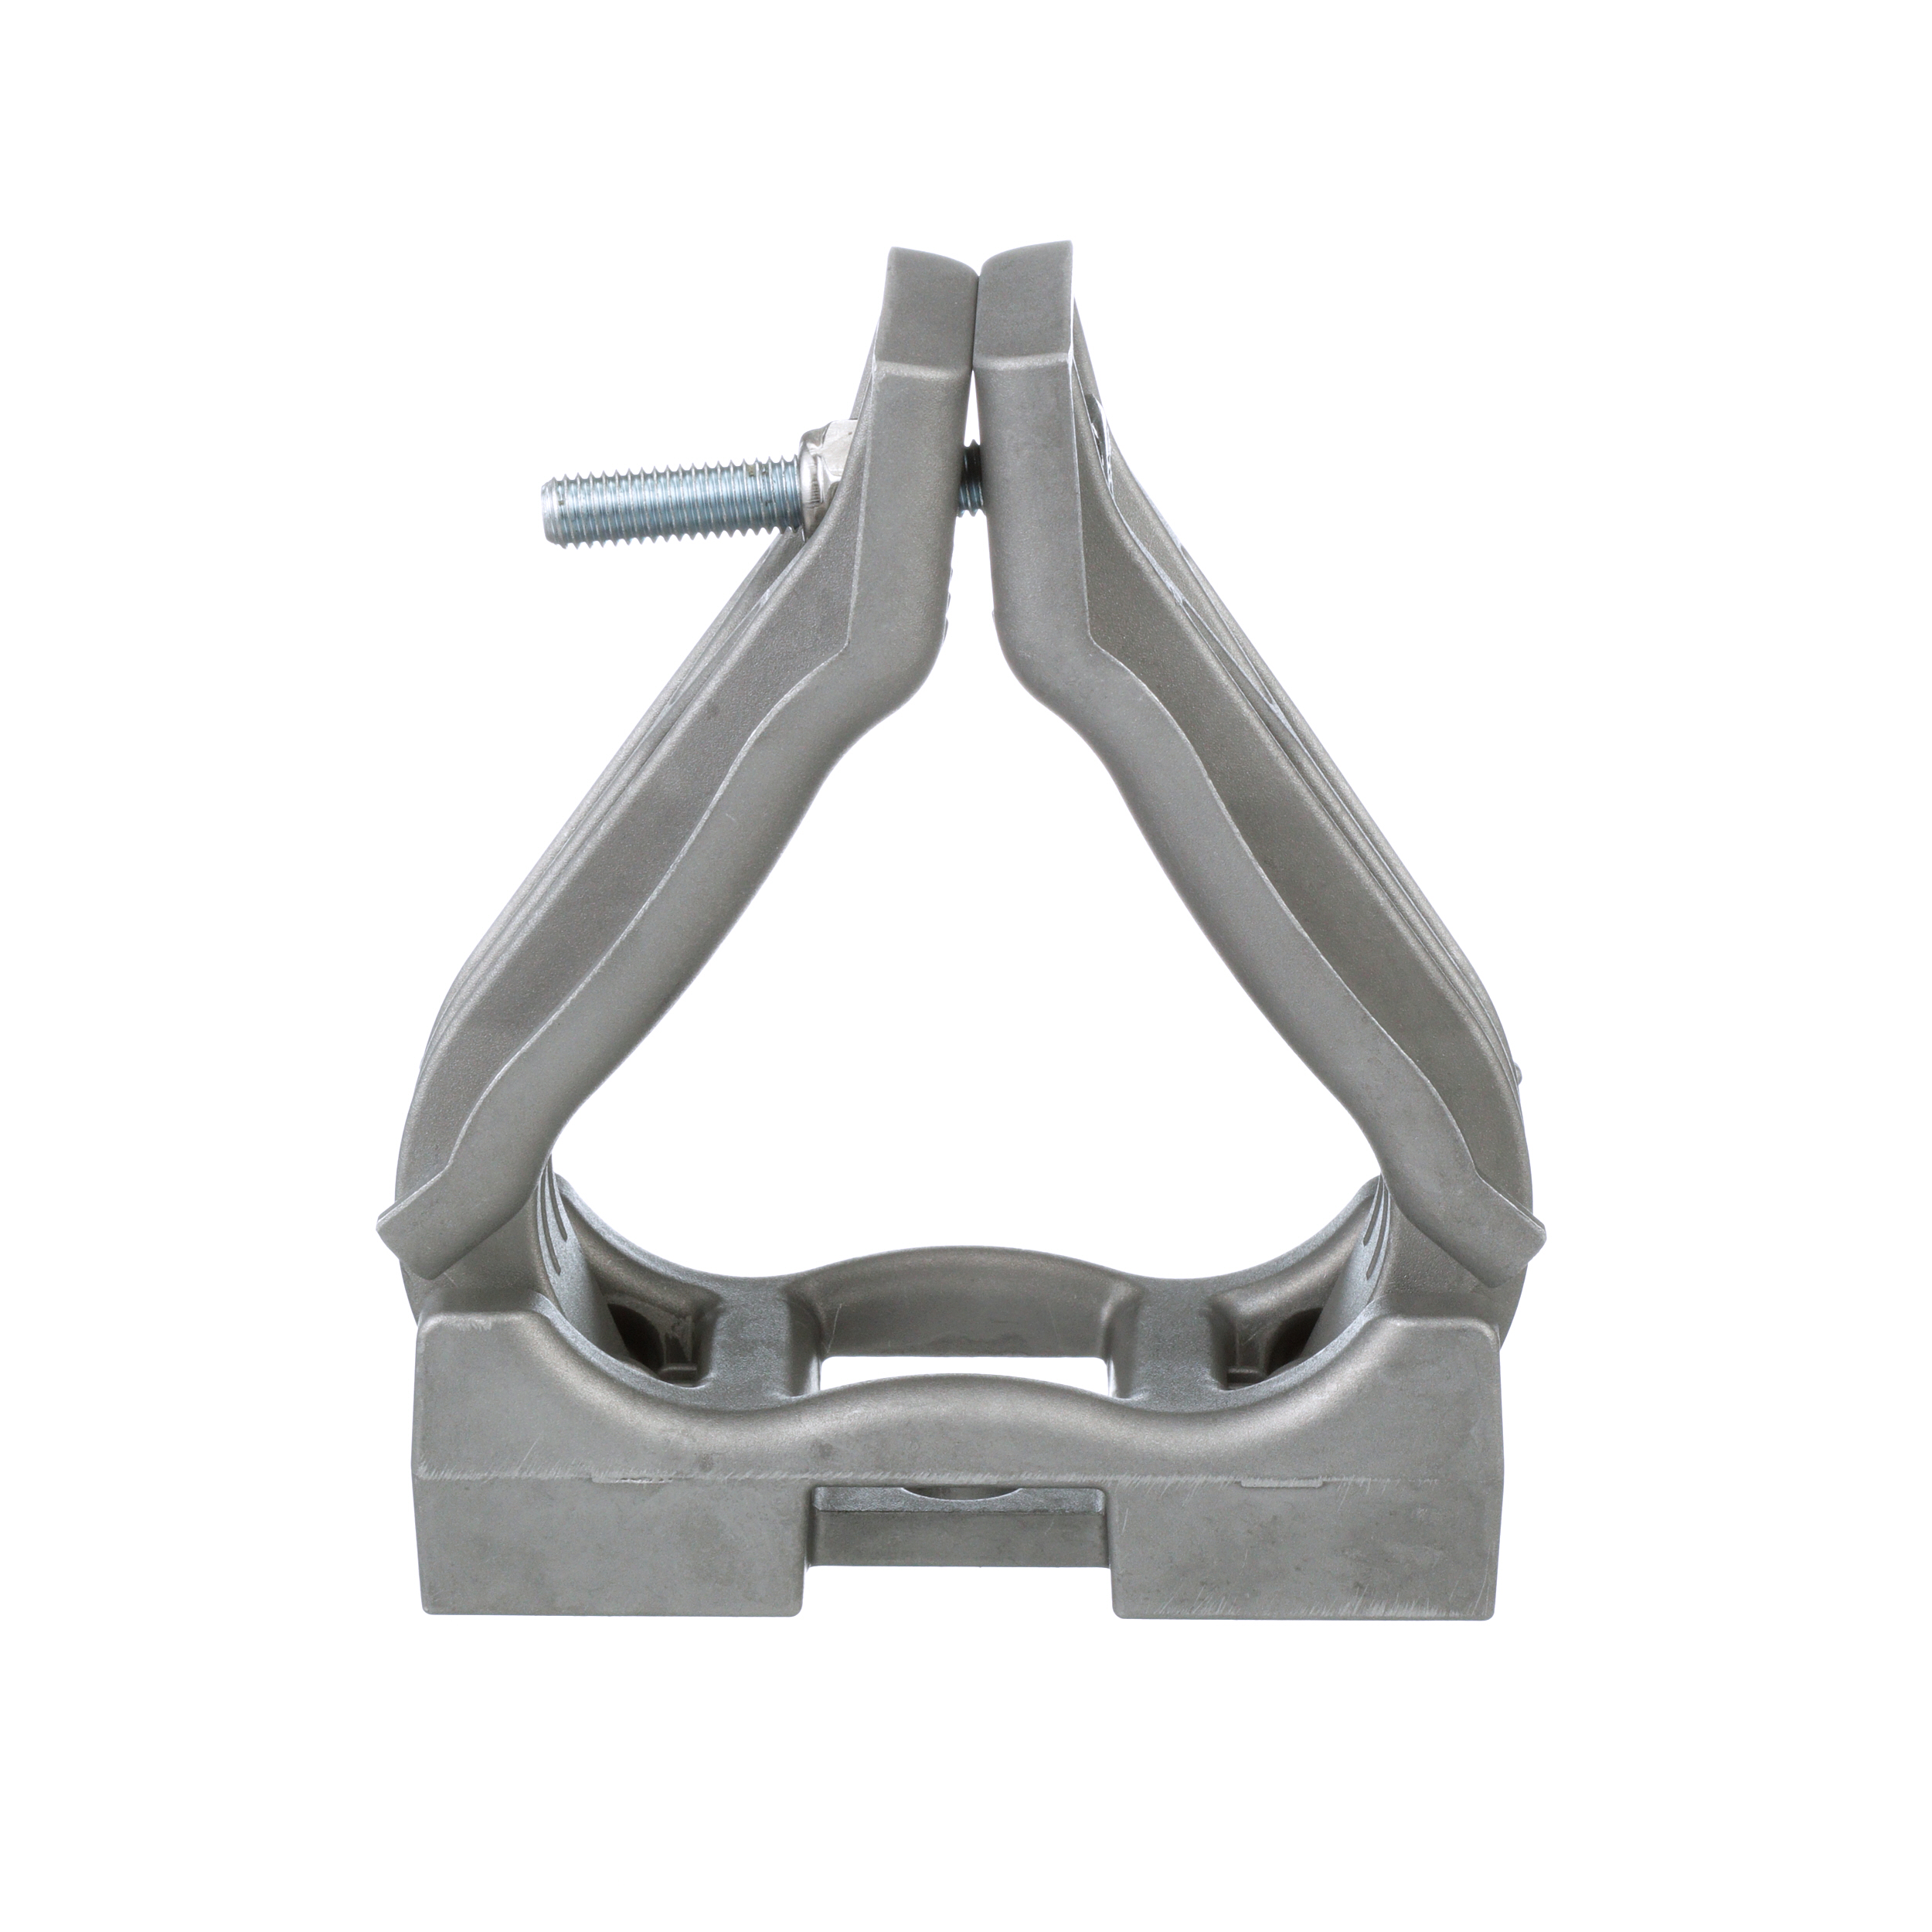 CCALTR2326-X Cable Cleat, TR Clamp Type, AL, Trefoil, 0.91-1.02in OD, PK10